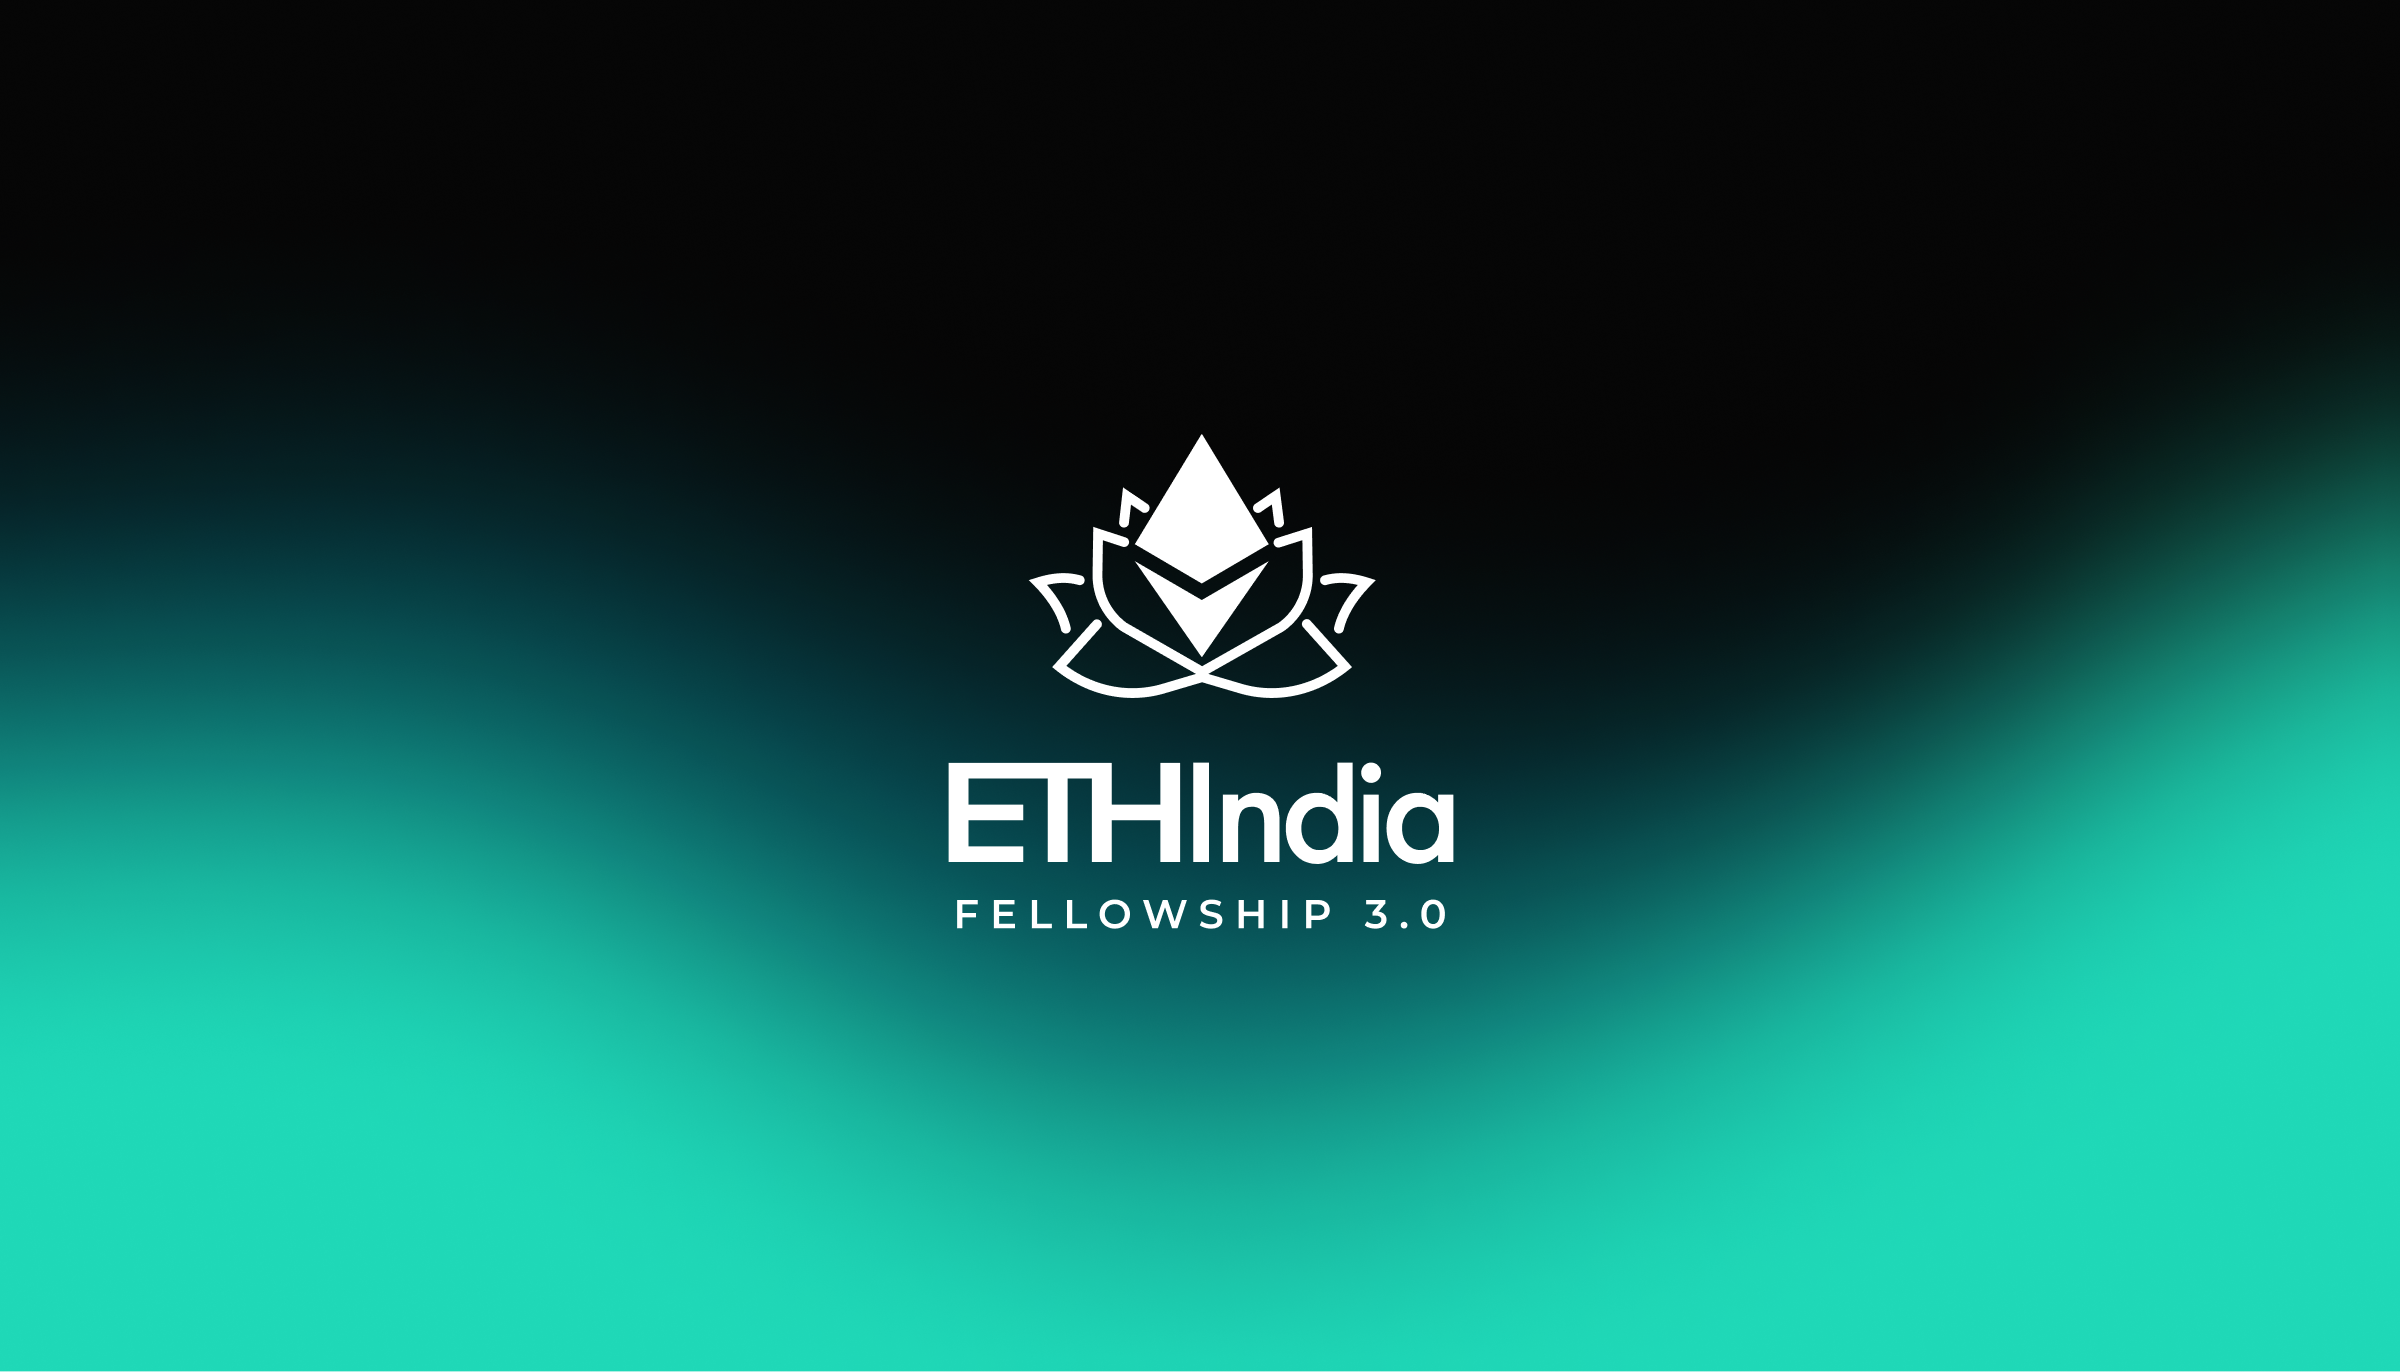 ETHIndia Fellowship 3.0: An Epic Journey Comes to an End!